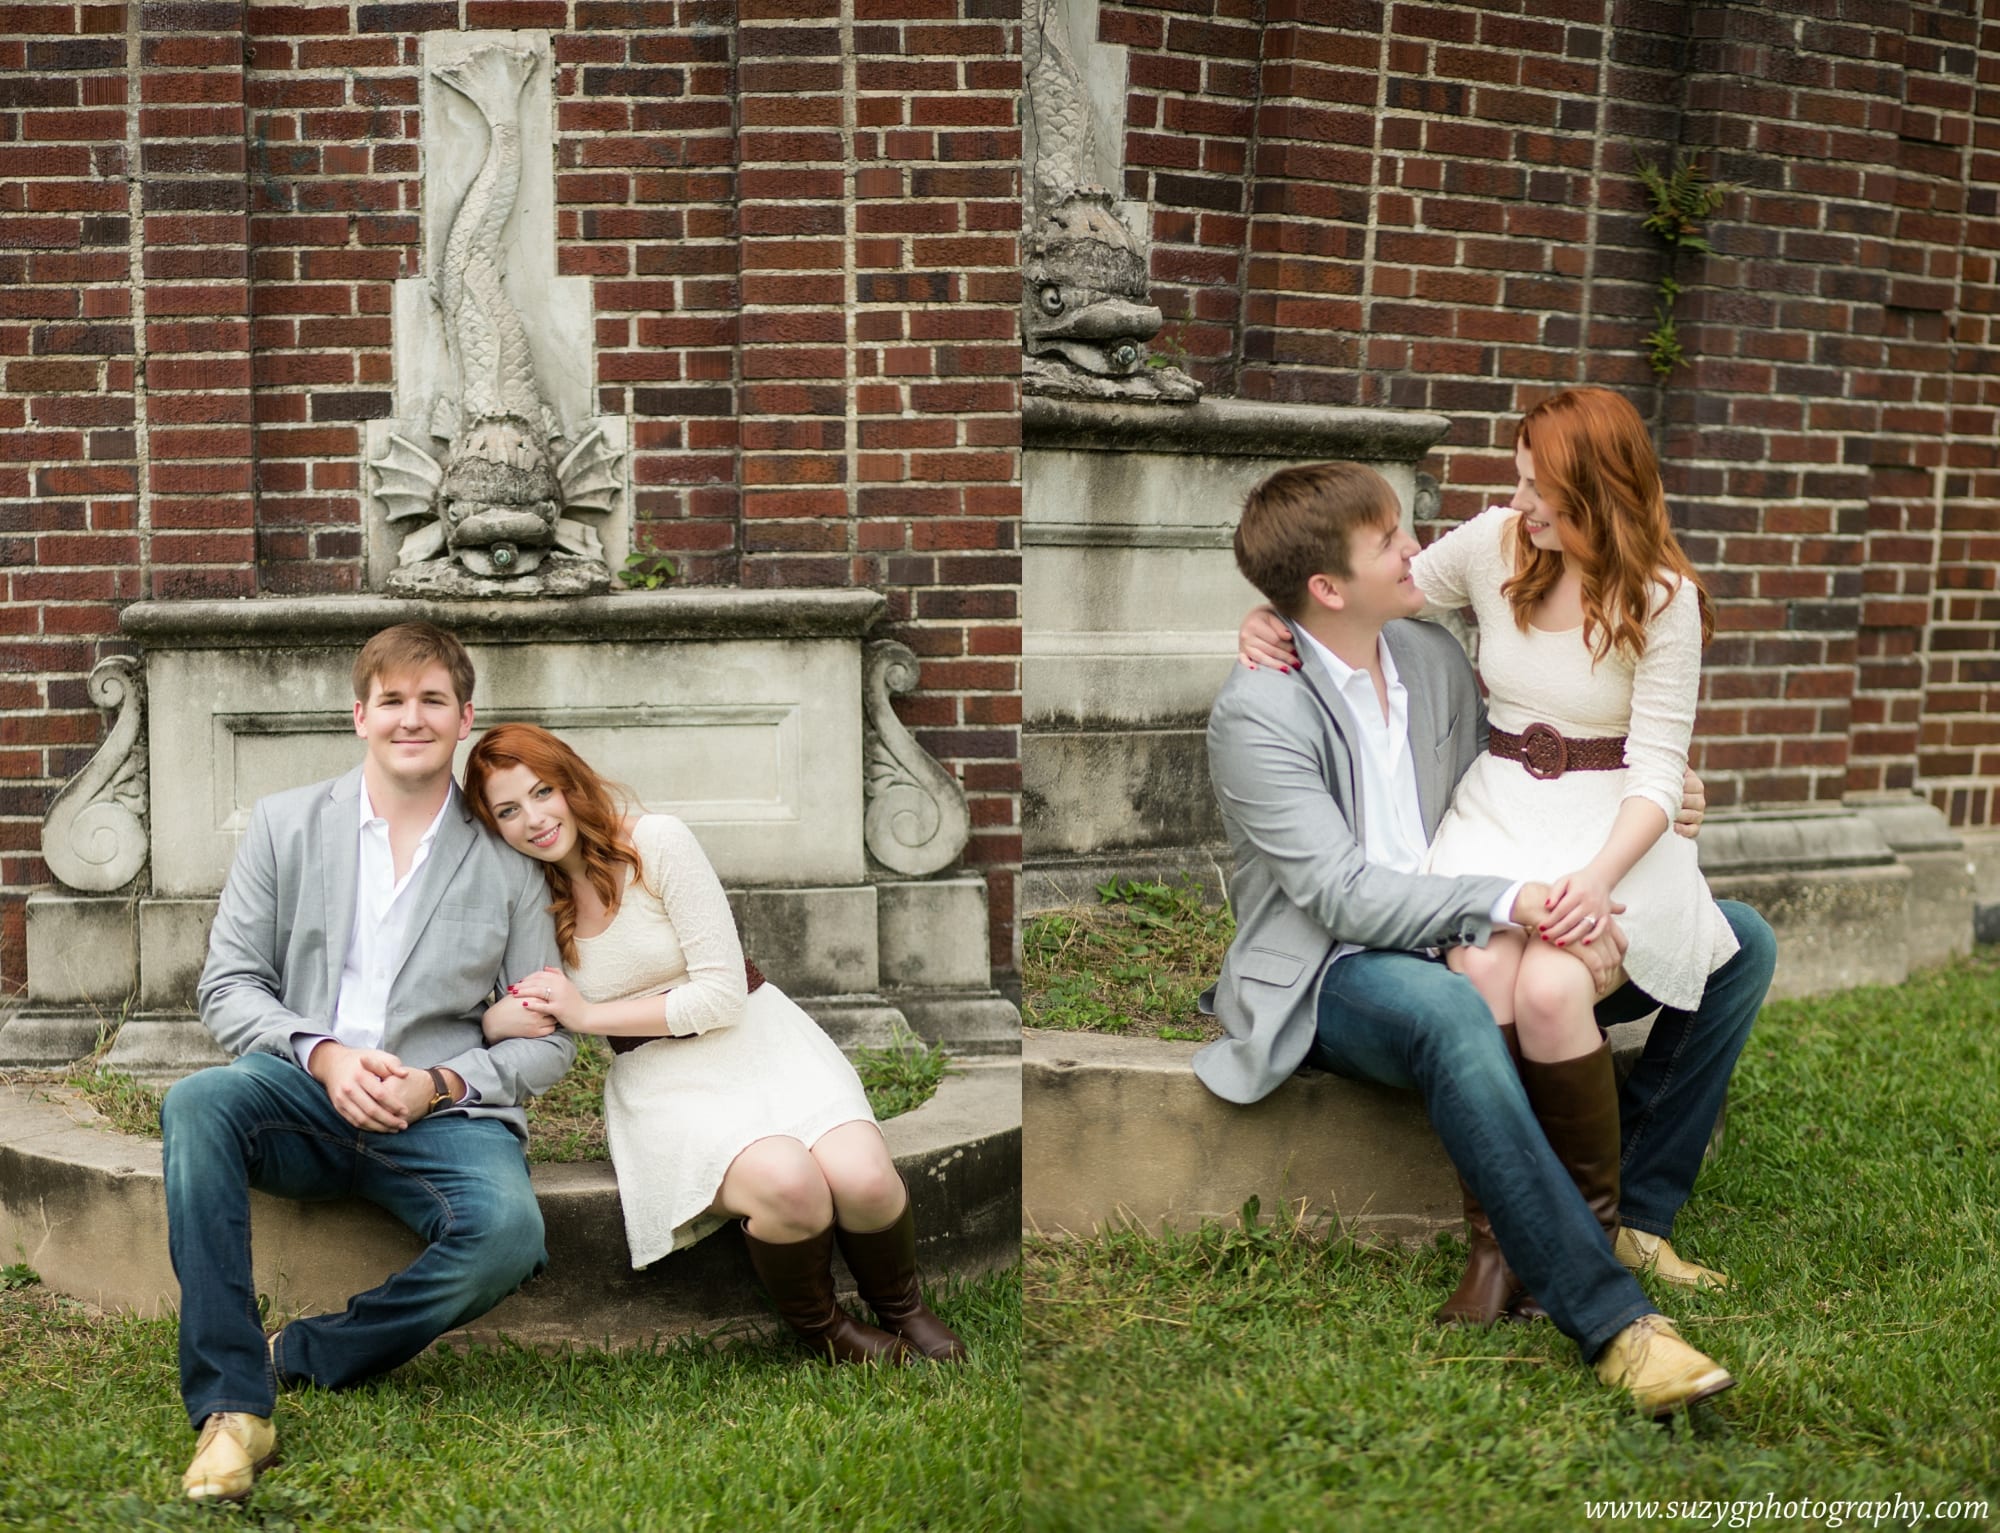 engagements-new orleans-texas-baton rouge-lake charles-suzy g-photography-suzygphotography_0124